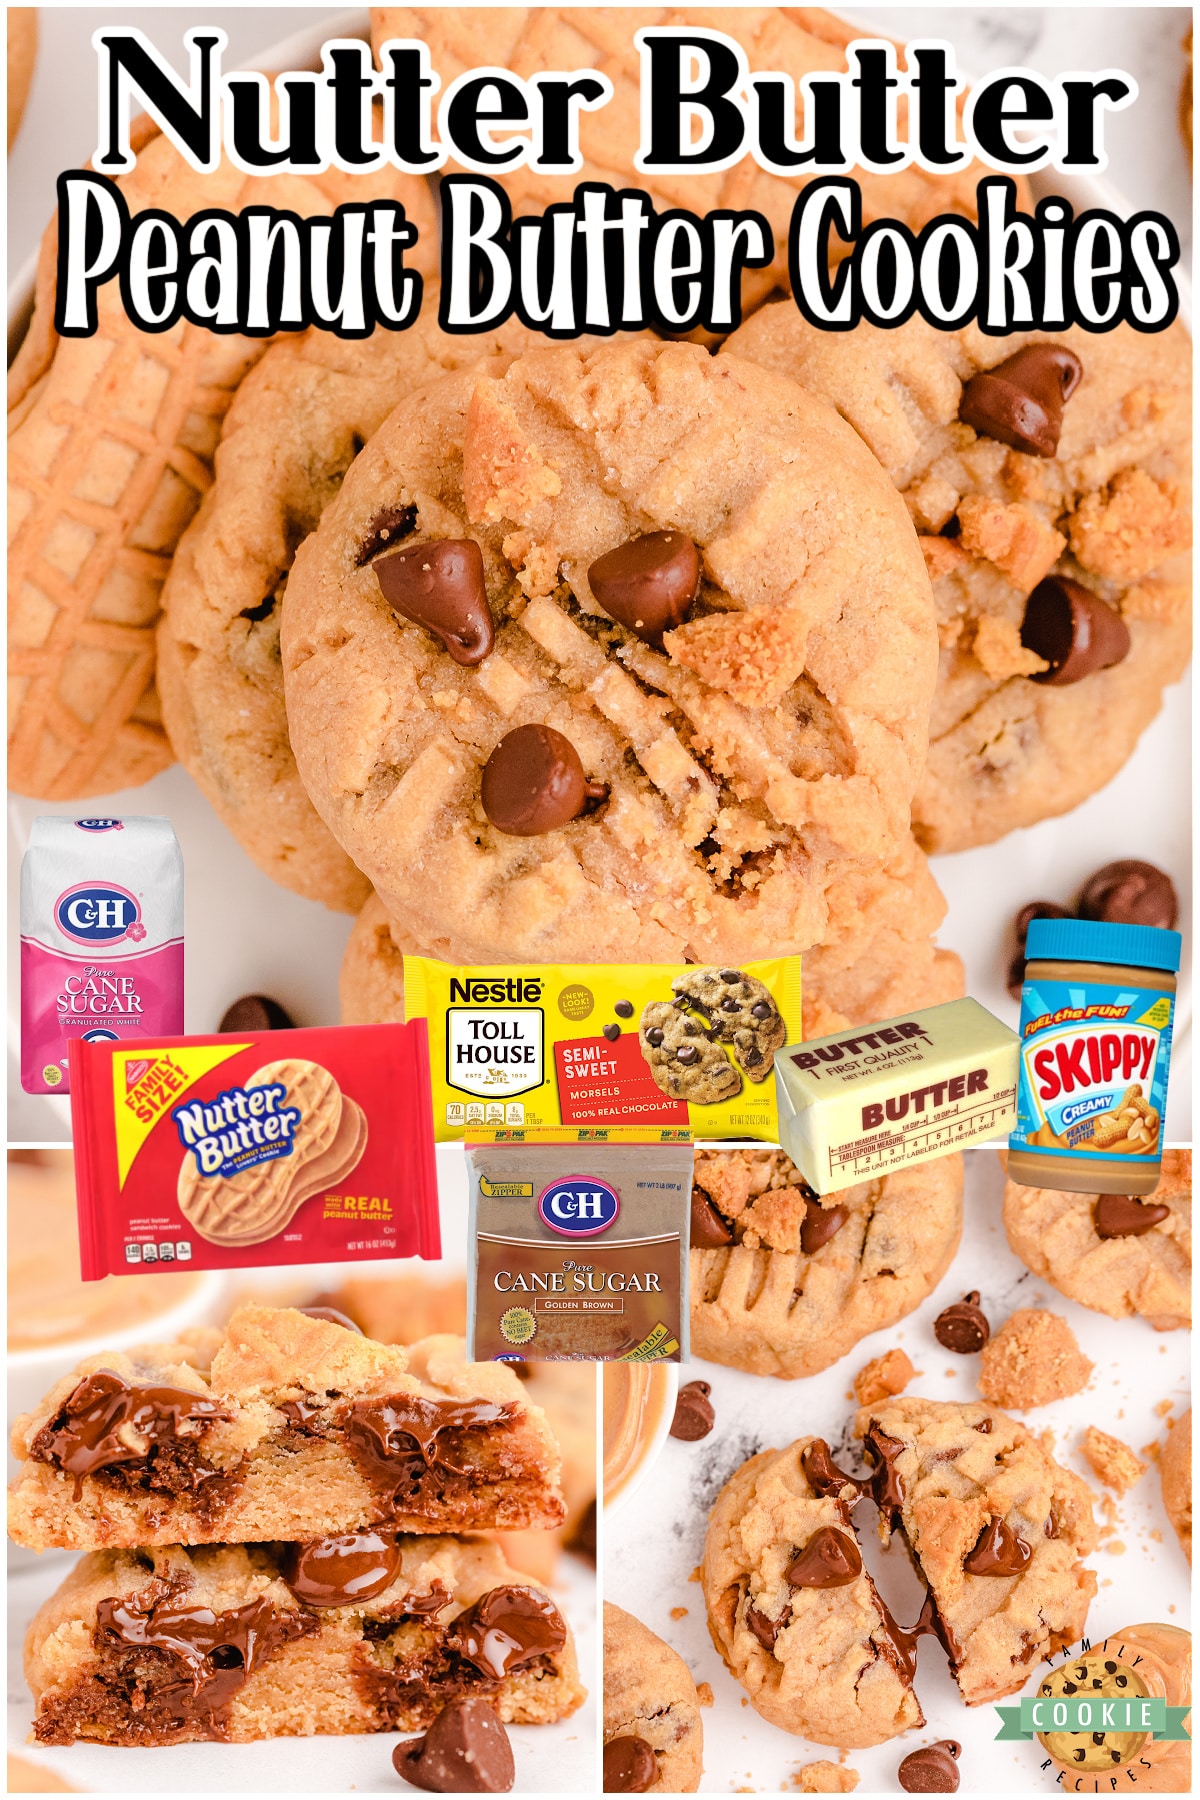 Nutter Butter Chocolate Chip Peanut Butter Cookies include the BEST combination: peanut butter + chocolate! Nutter Butter lovers unite with these peanut butter chocolate chip cookies you won't be able to get enough of.